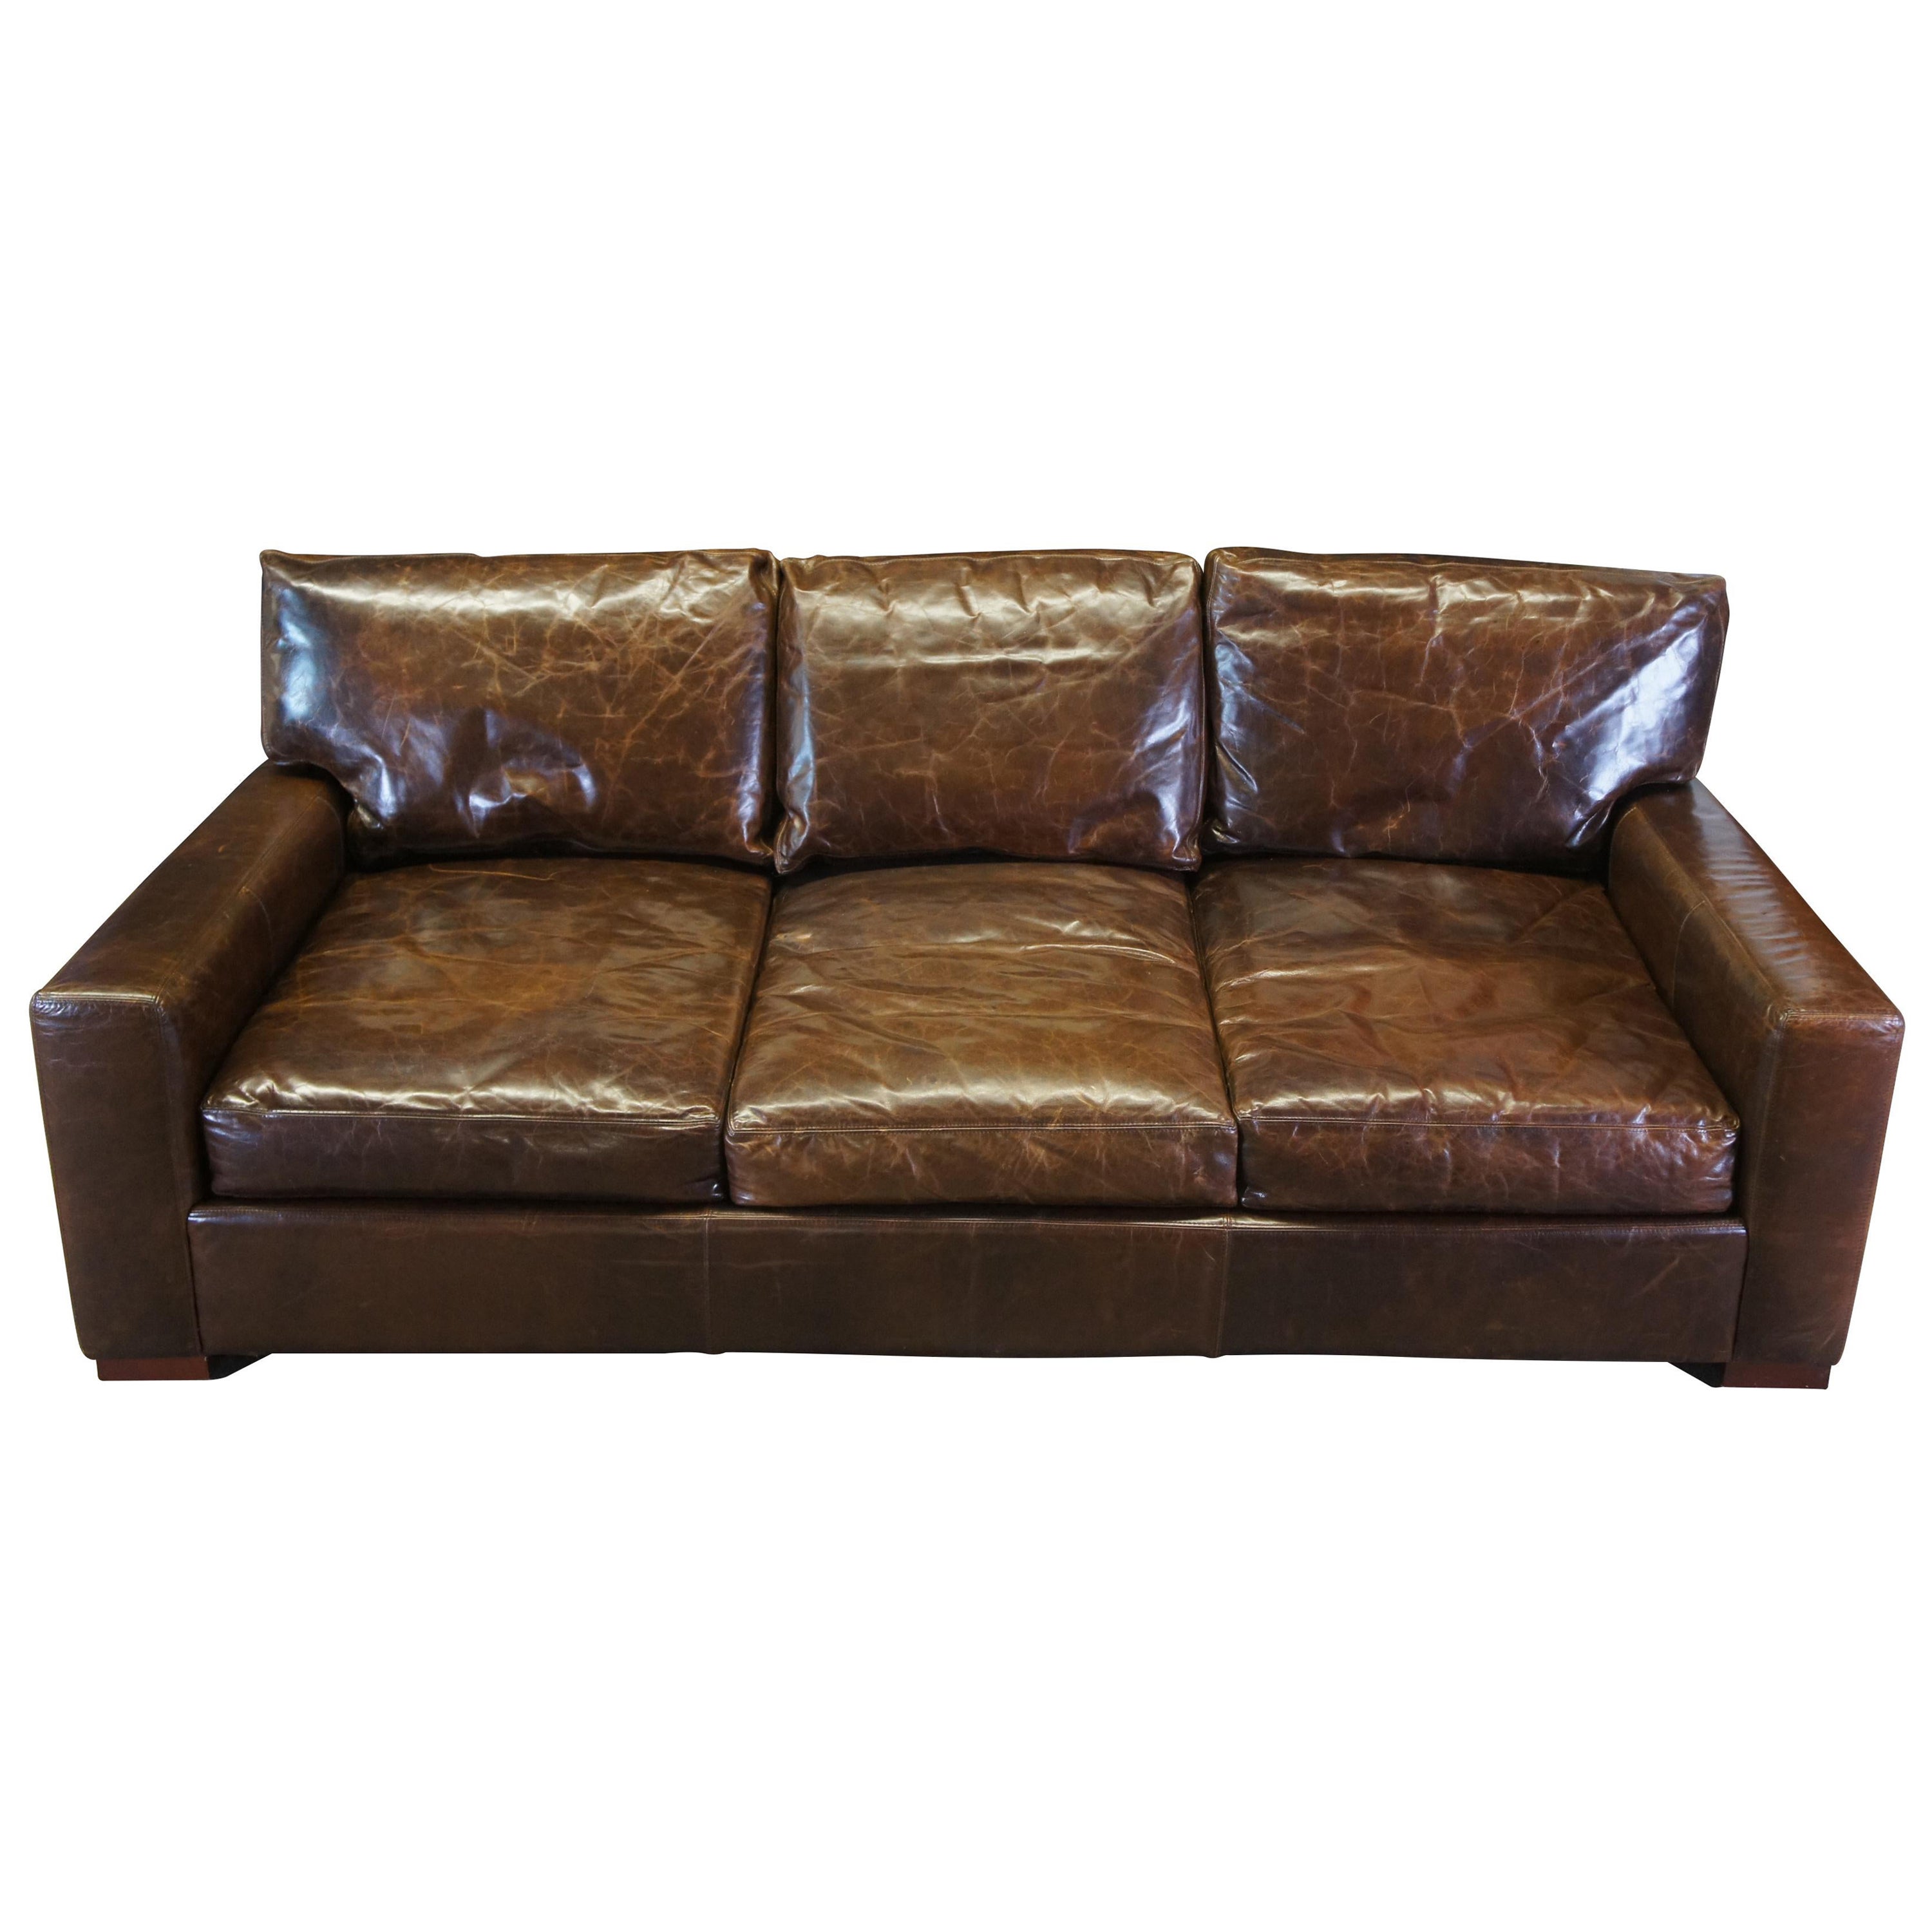 Restoration Hardware Maxwell Sofa Cocoa Brown Leather Minimalist Track Arm Couch